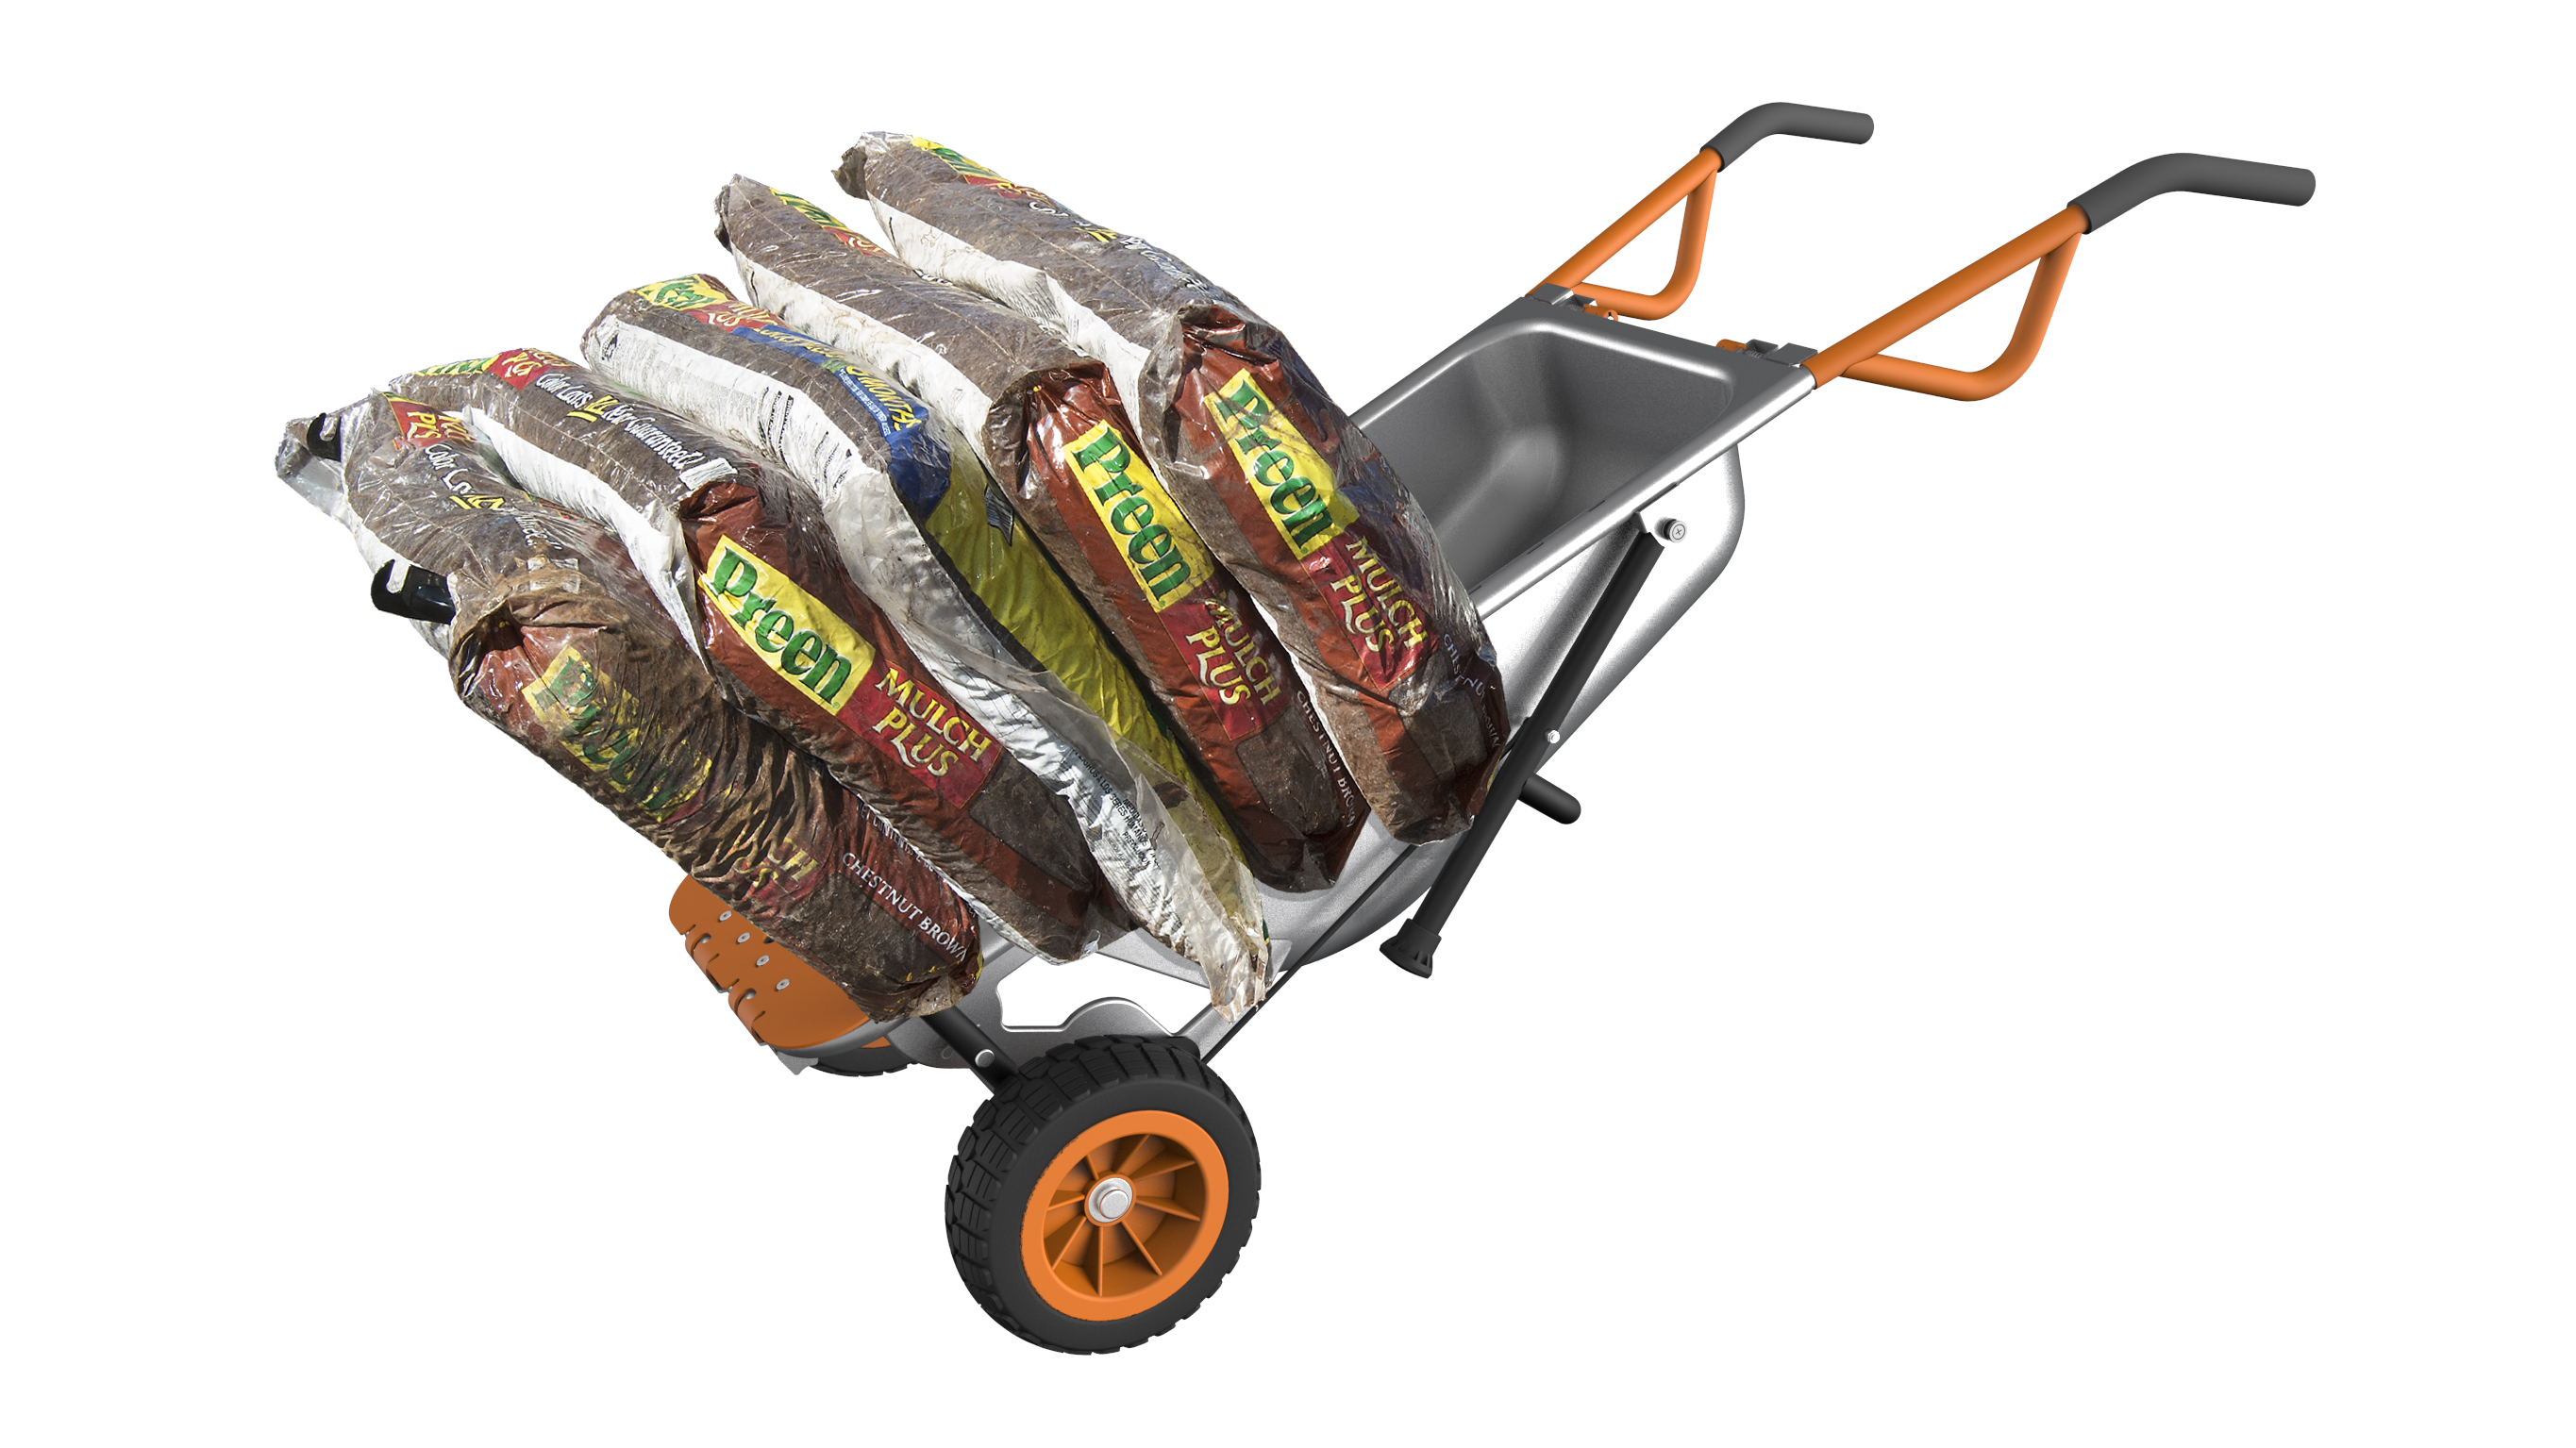 WORX AeroCart is ideal for transporting bags of mulch